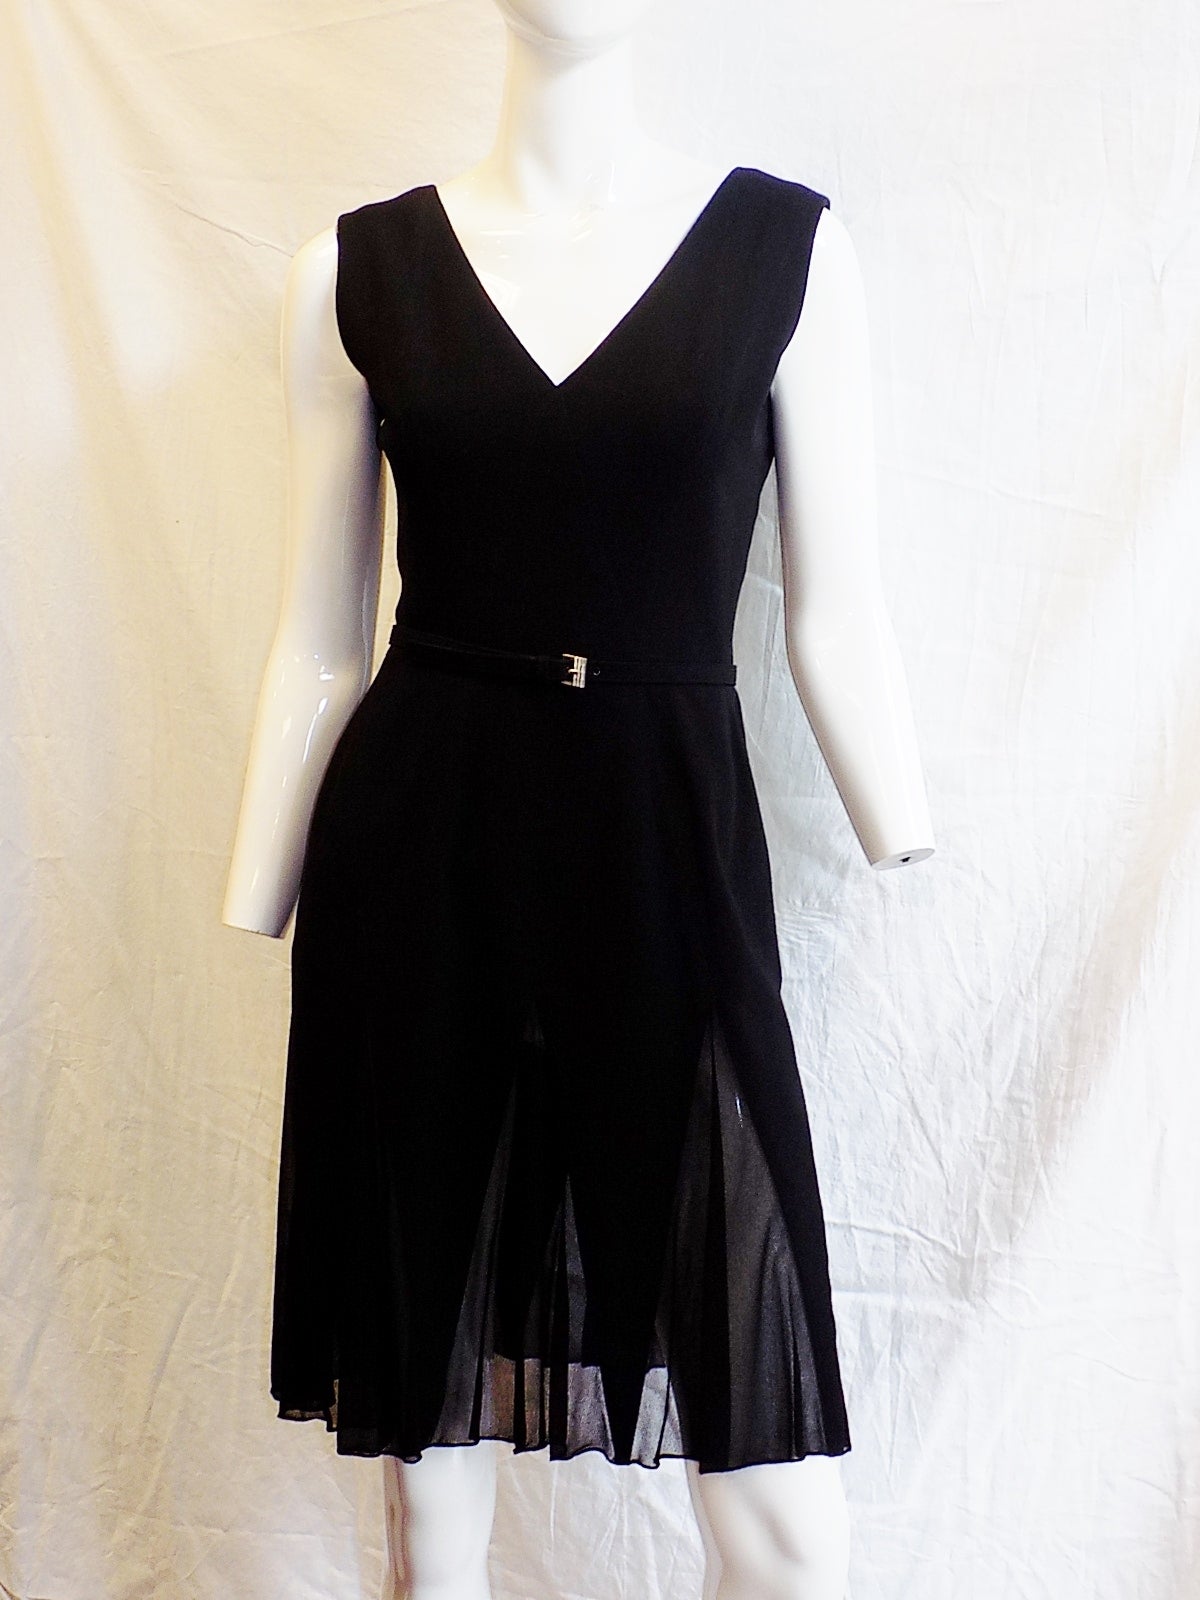 Simple and elegant Chanel Haute Couture Black wool gorgette dress. Dress is featuring asymmetrical row of covered small buttons at the side of the back along the zipper line,V neckline, black chiffon inserts in skirt part and two belts. One with